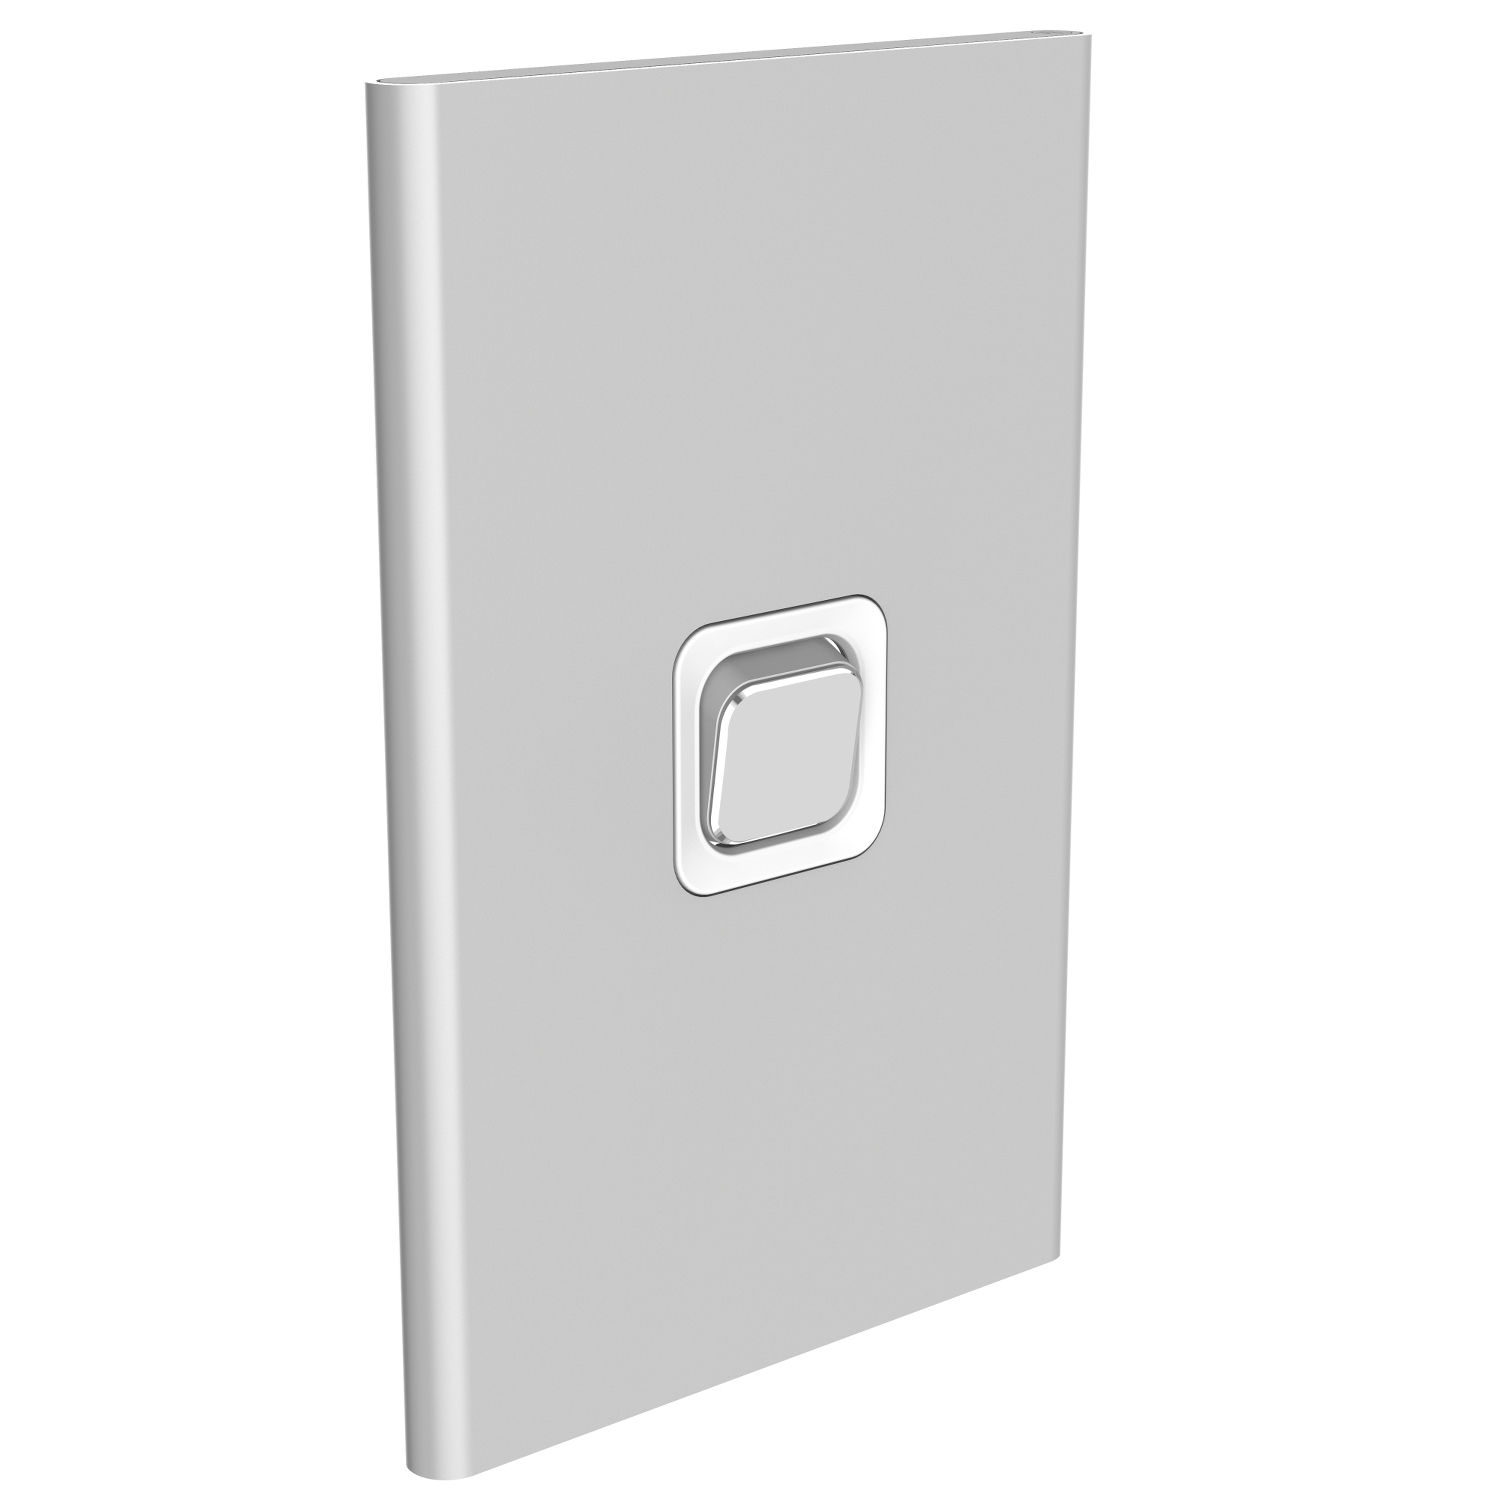 PDLS381C-SV - PDL Iconic Styl, cover frame, 1 switch, vertical - Silver